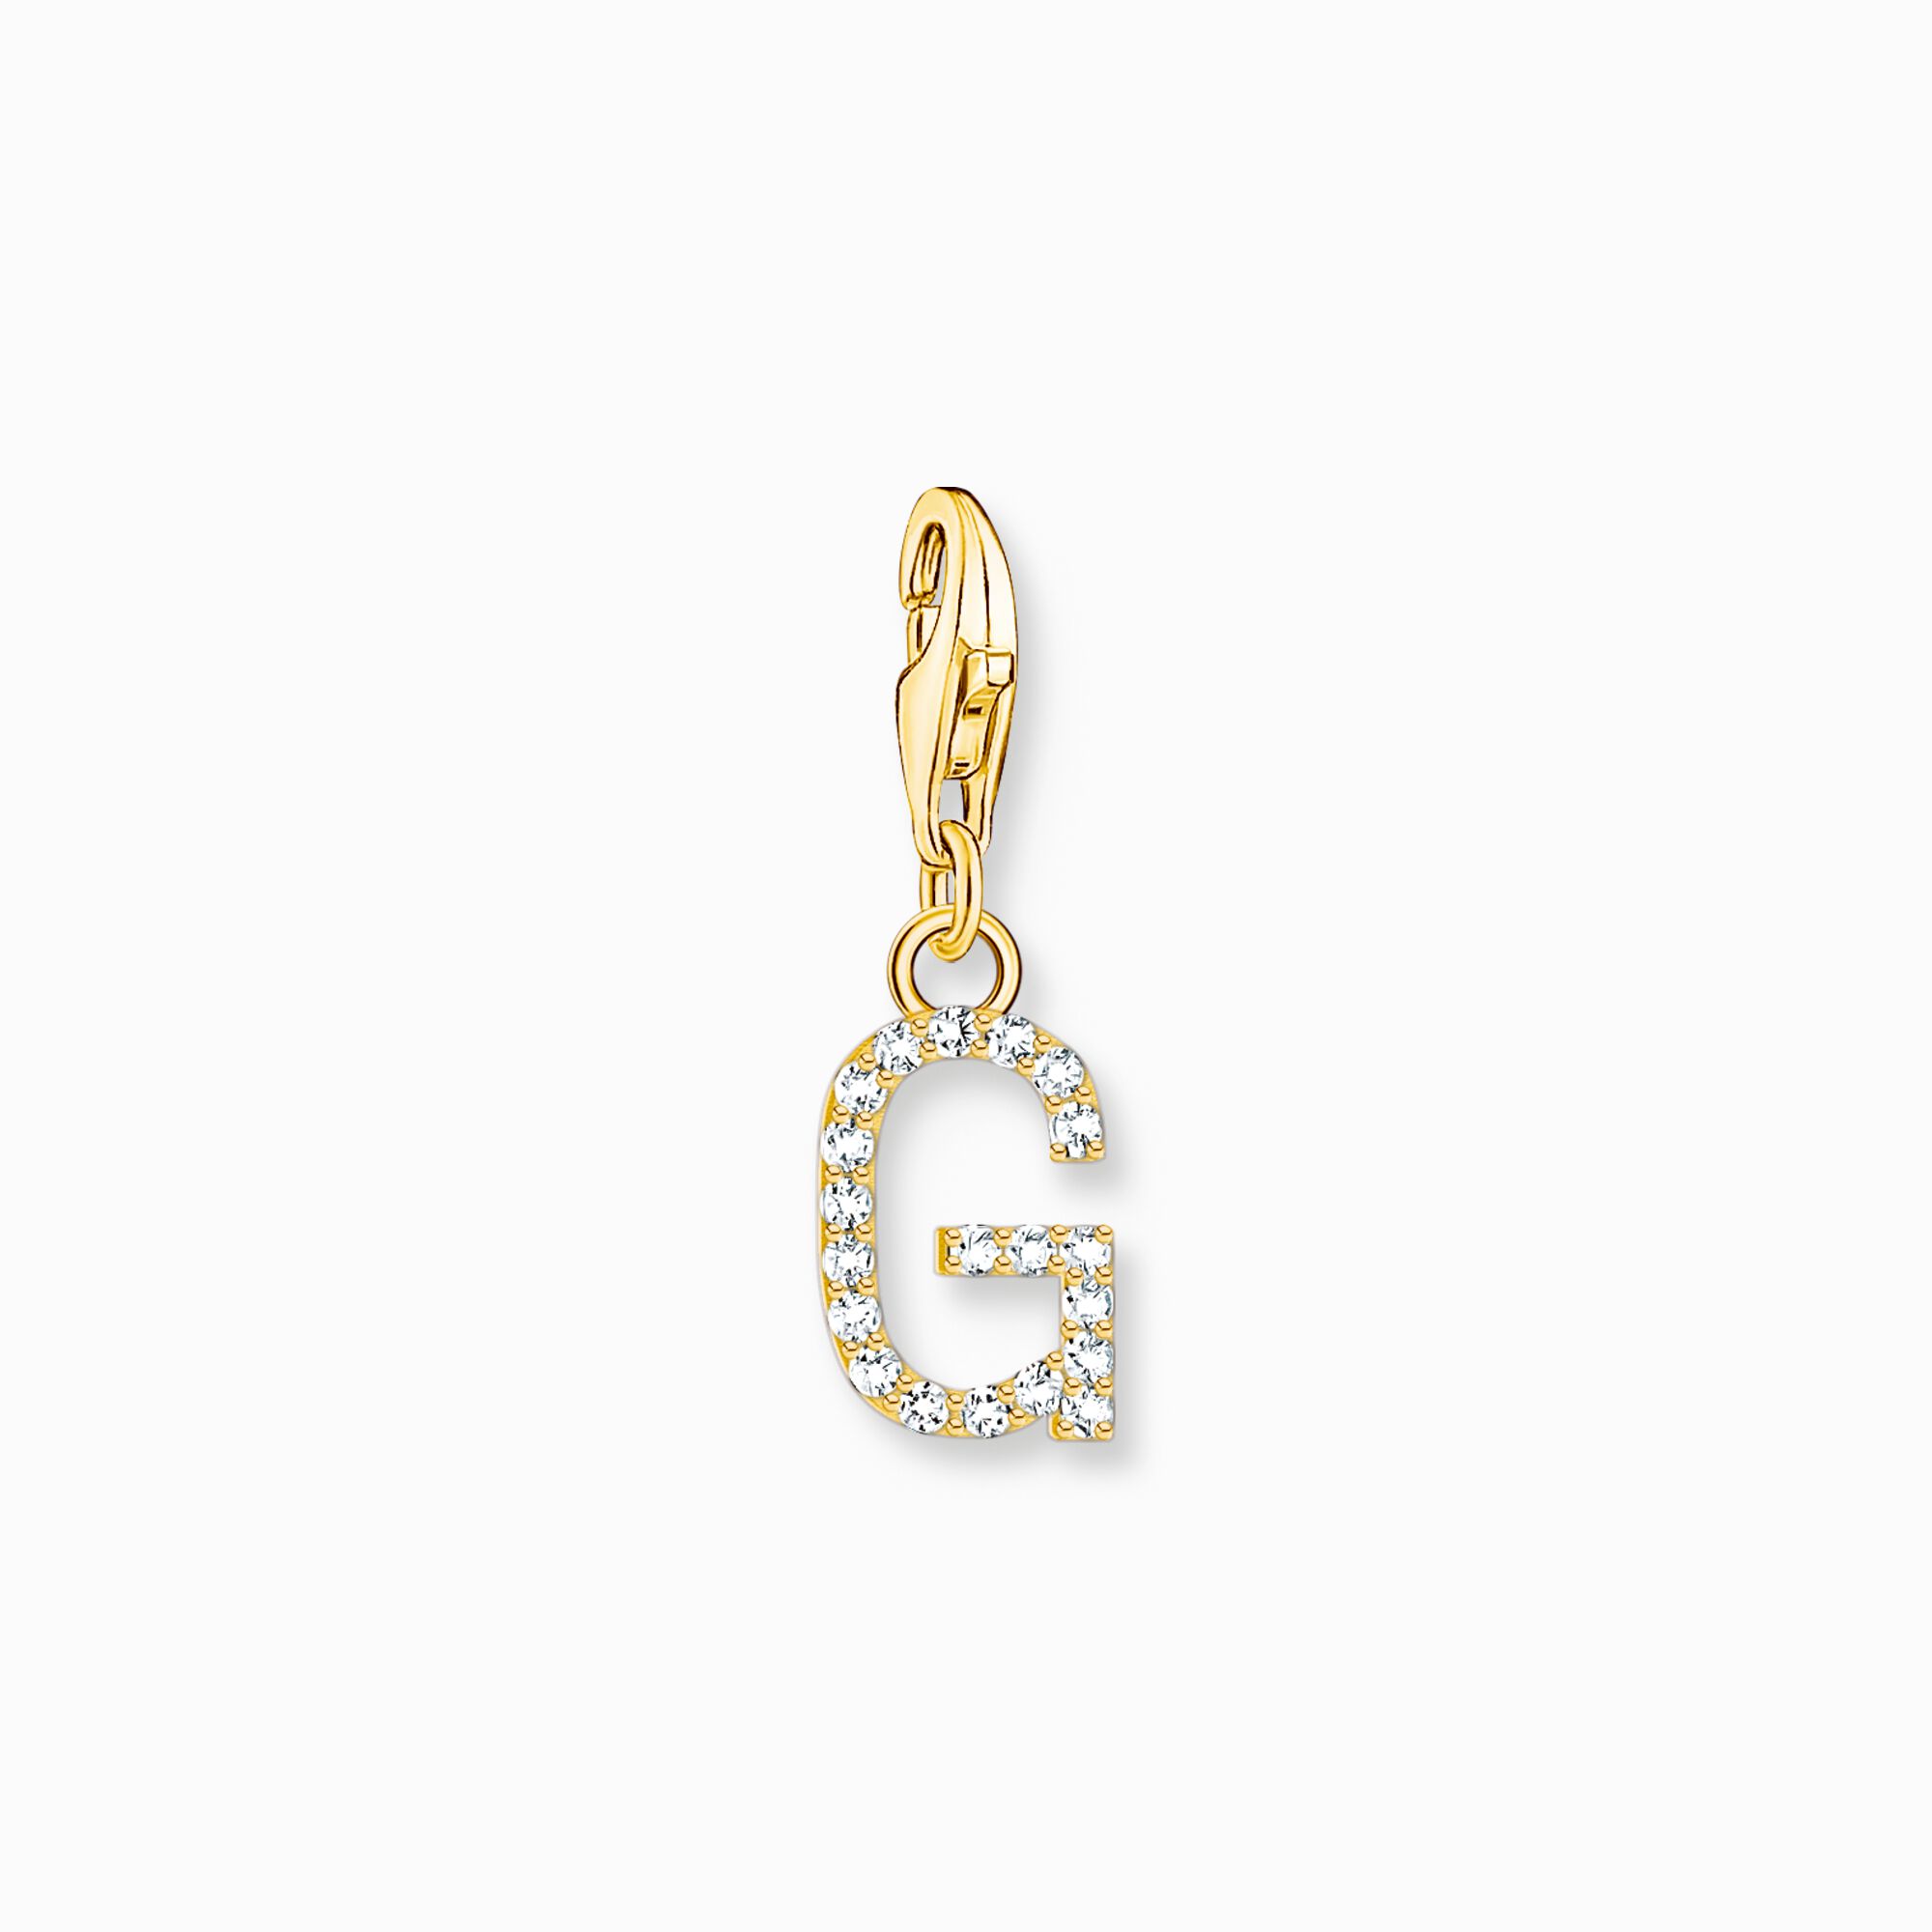 Charm pendant letter G with white stones gold plated from the Charm Club collection in the THOMAS SABO online store